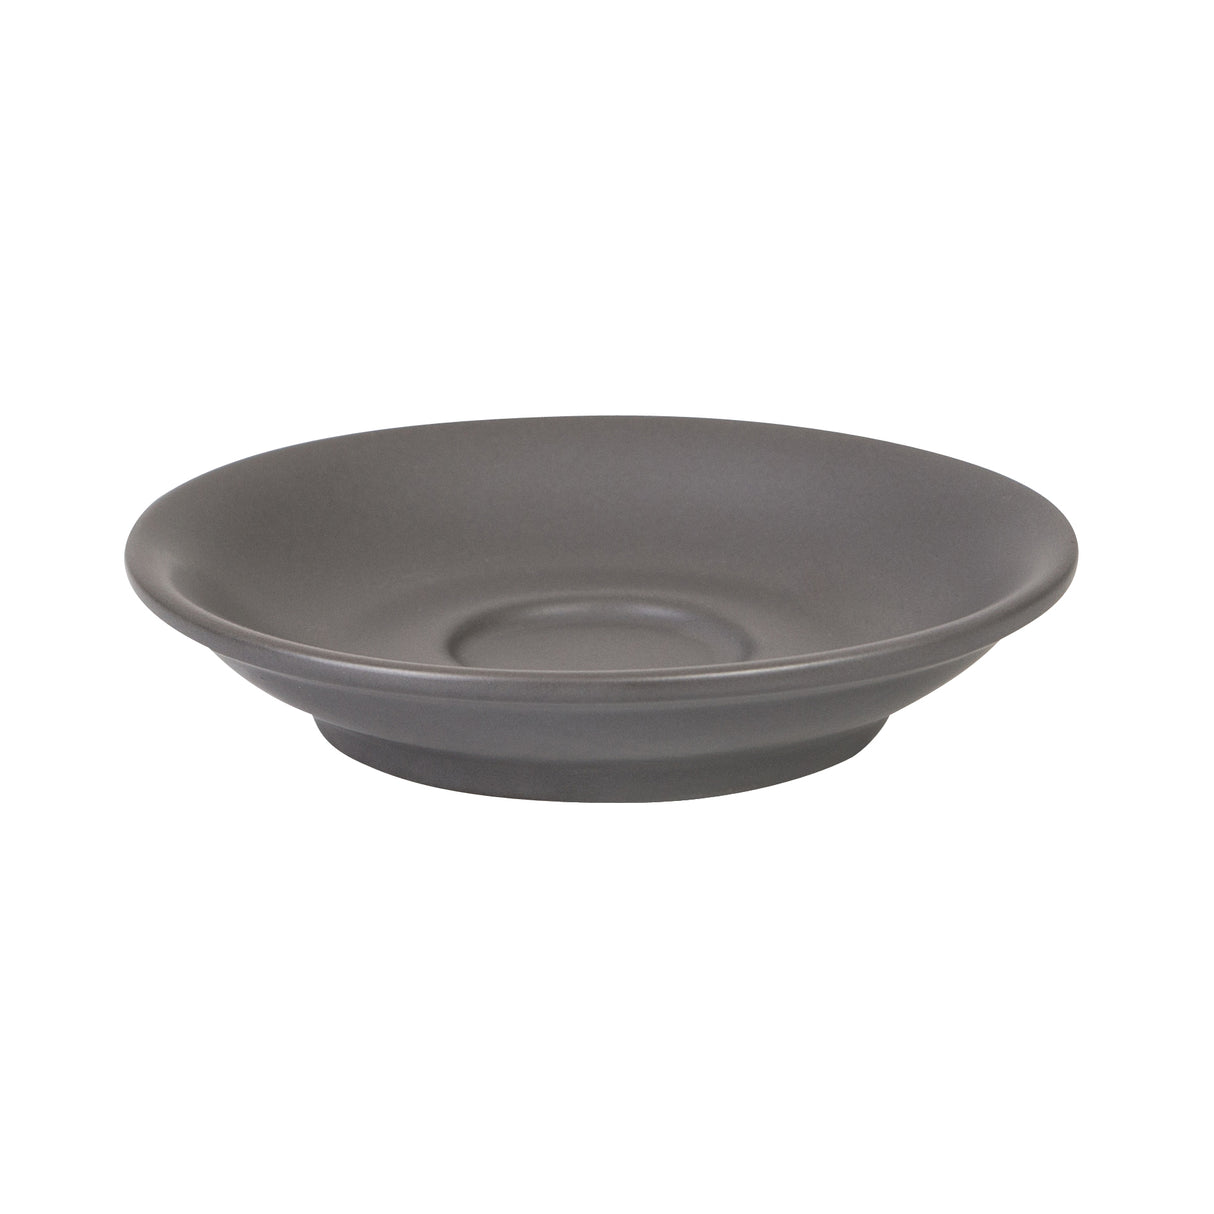 Saucer - Slate, 120mm from Bevande. made out of Porcelain and sold in boxes of 6. Hospitality quality at wholesale price with The Flying Fork! 